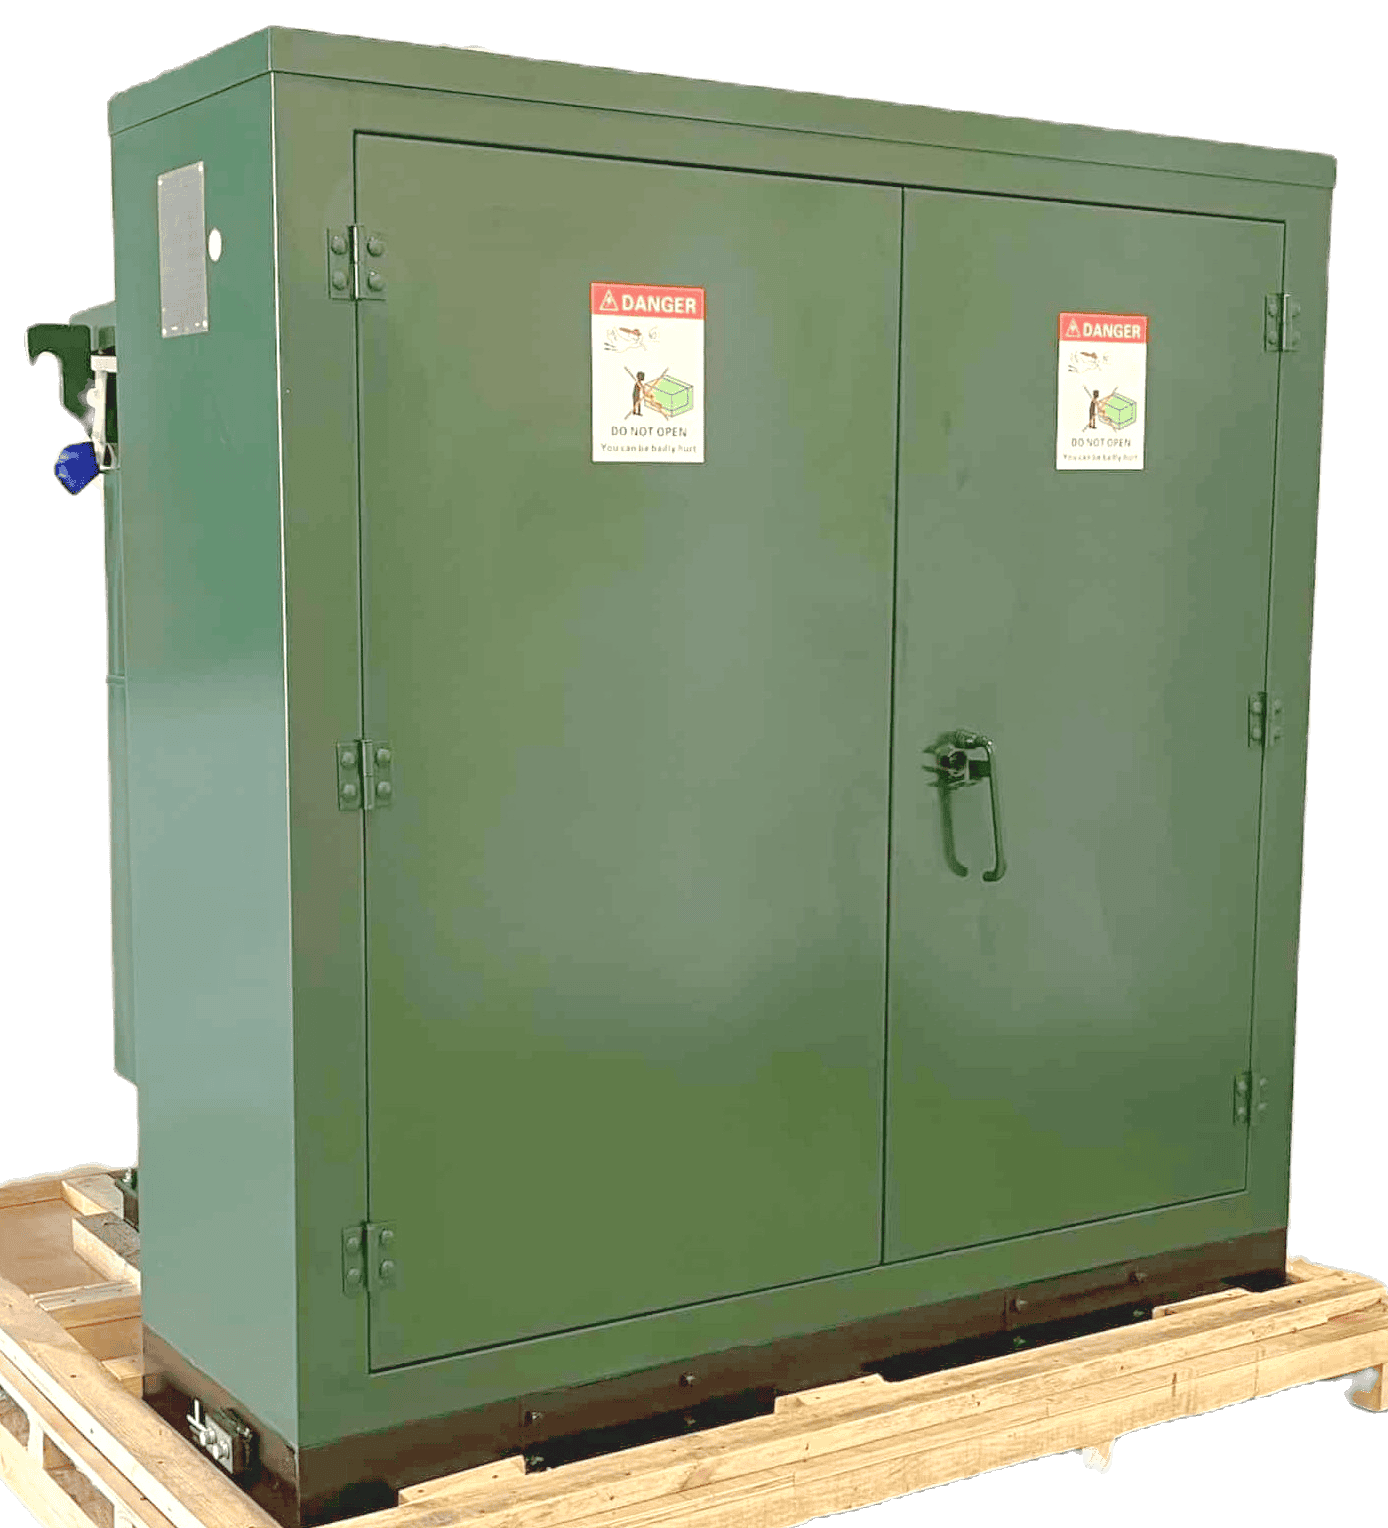 Padmount transformers are distribution transformers mounted on a concrete pad or foundation. These transformers are enclosed in tamper-resistant, weatherproof metal cabinets, making them ideal for urban and suburban environments.